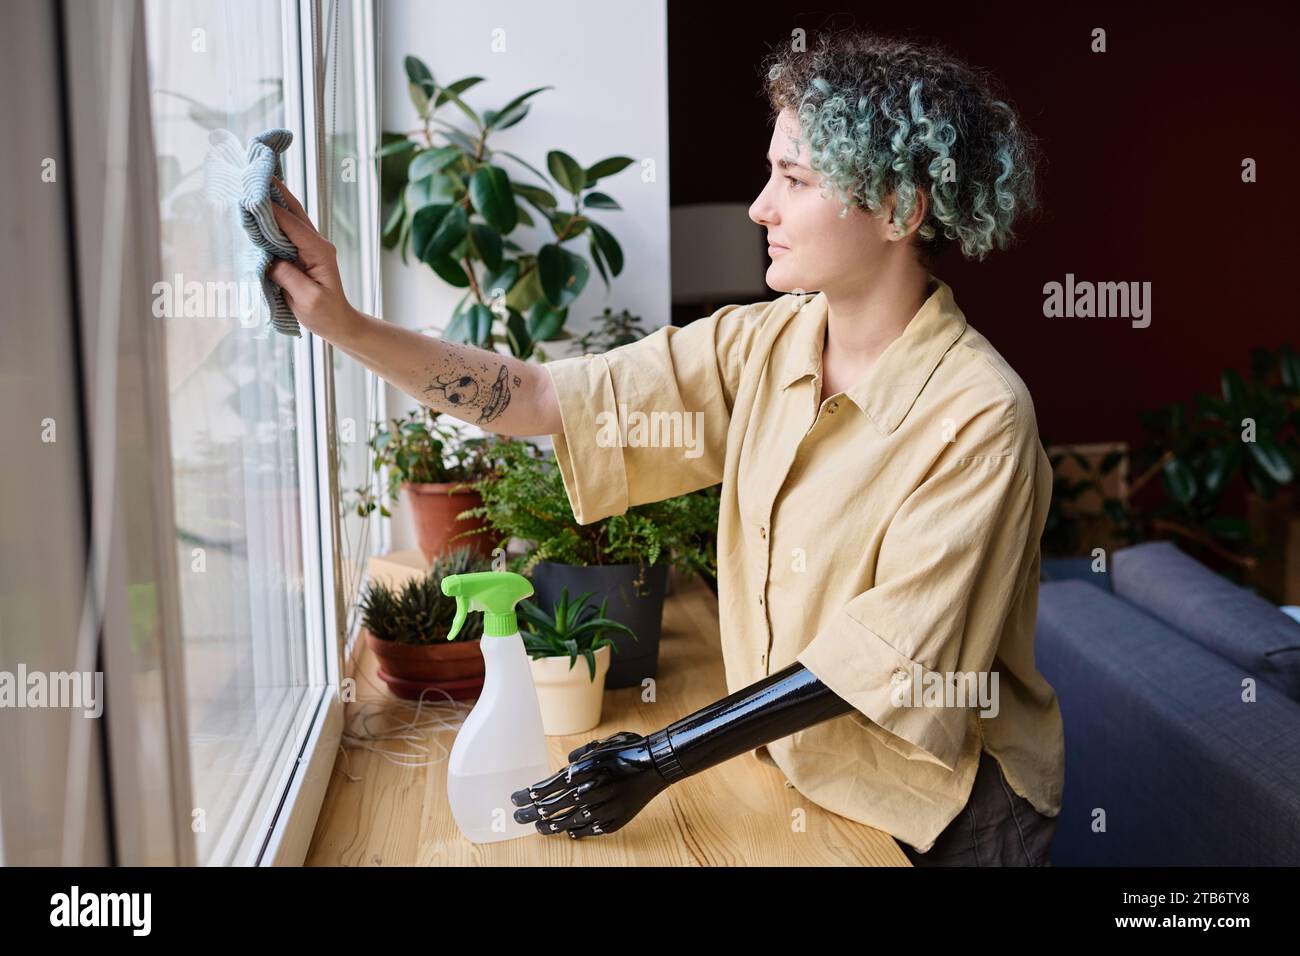 Young woman with prosthetic arm cleaning window in new apartment during move Stock Photo